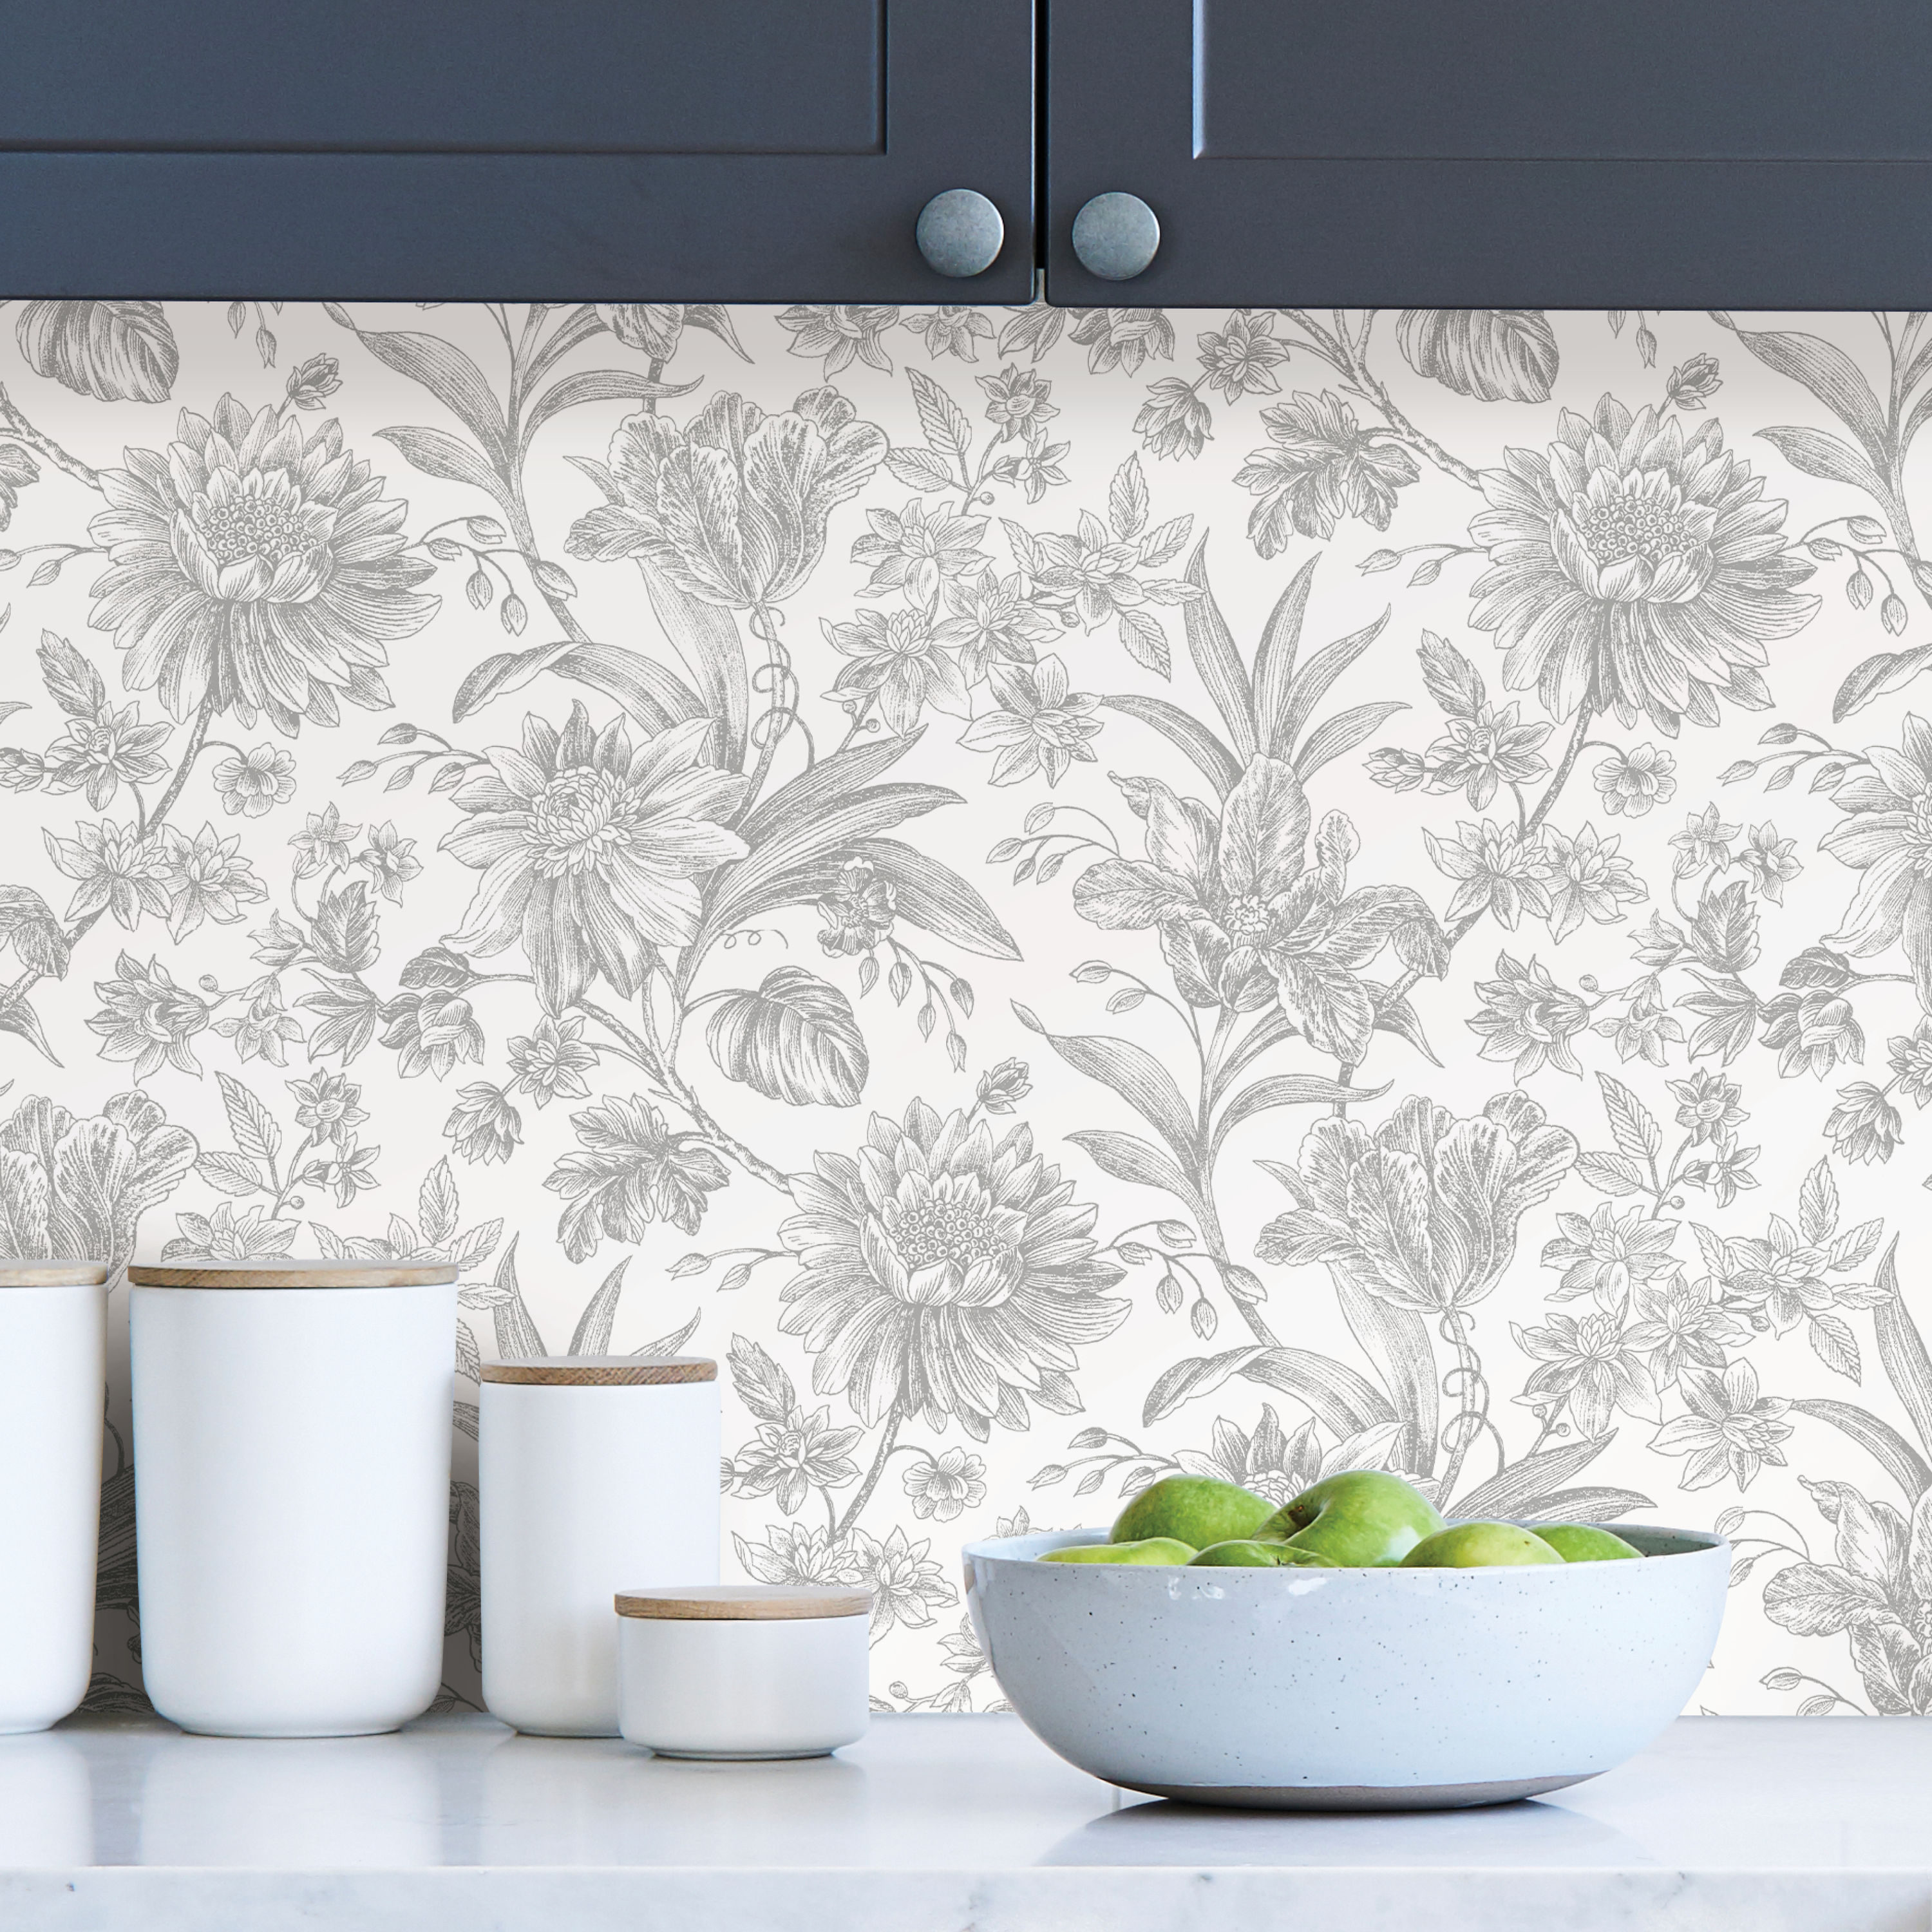 allen + roth 30.75-sq ft Grey Vinyl Floral Self-adhesive Peel and Stick ...